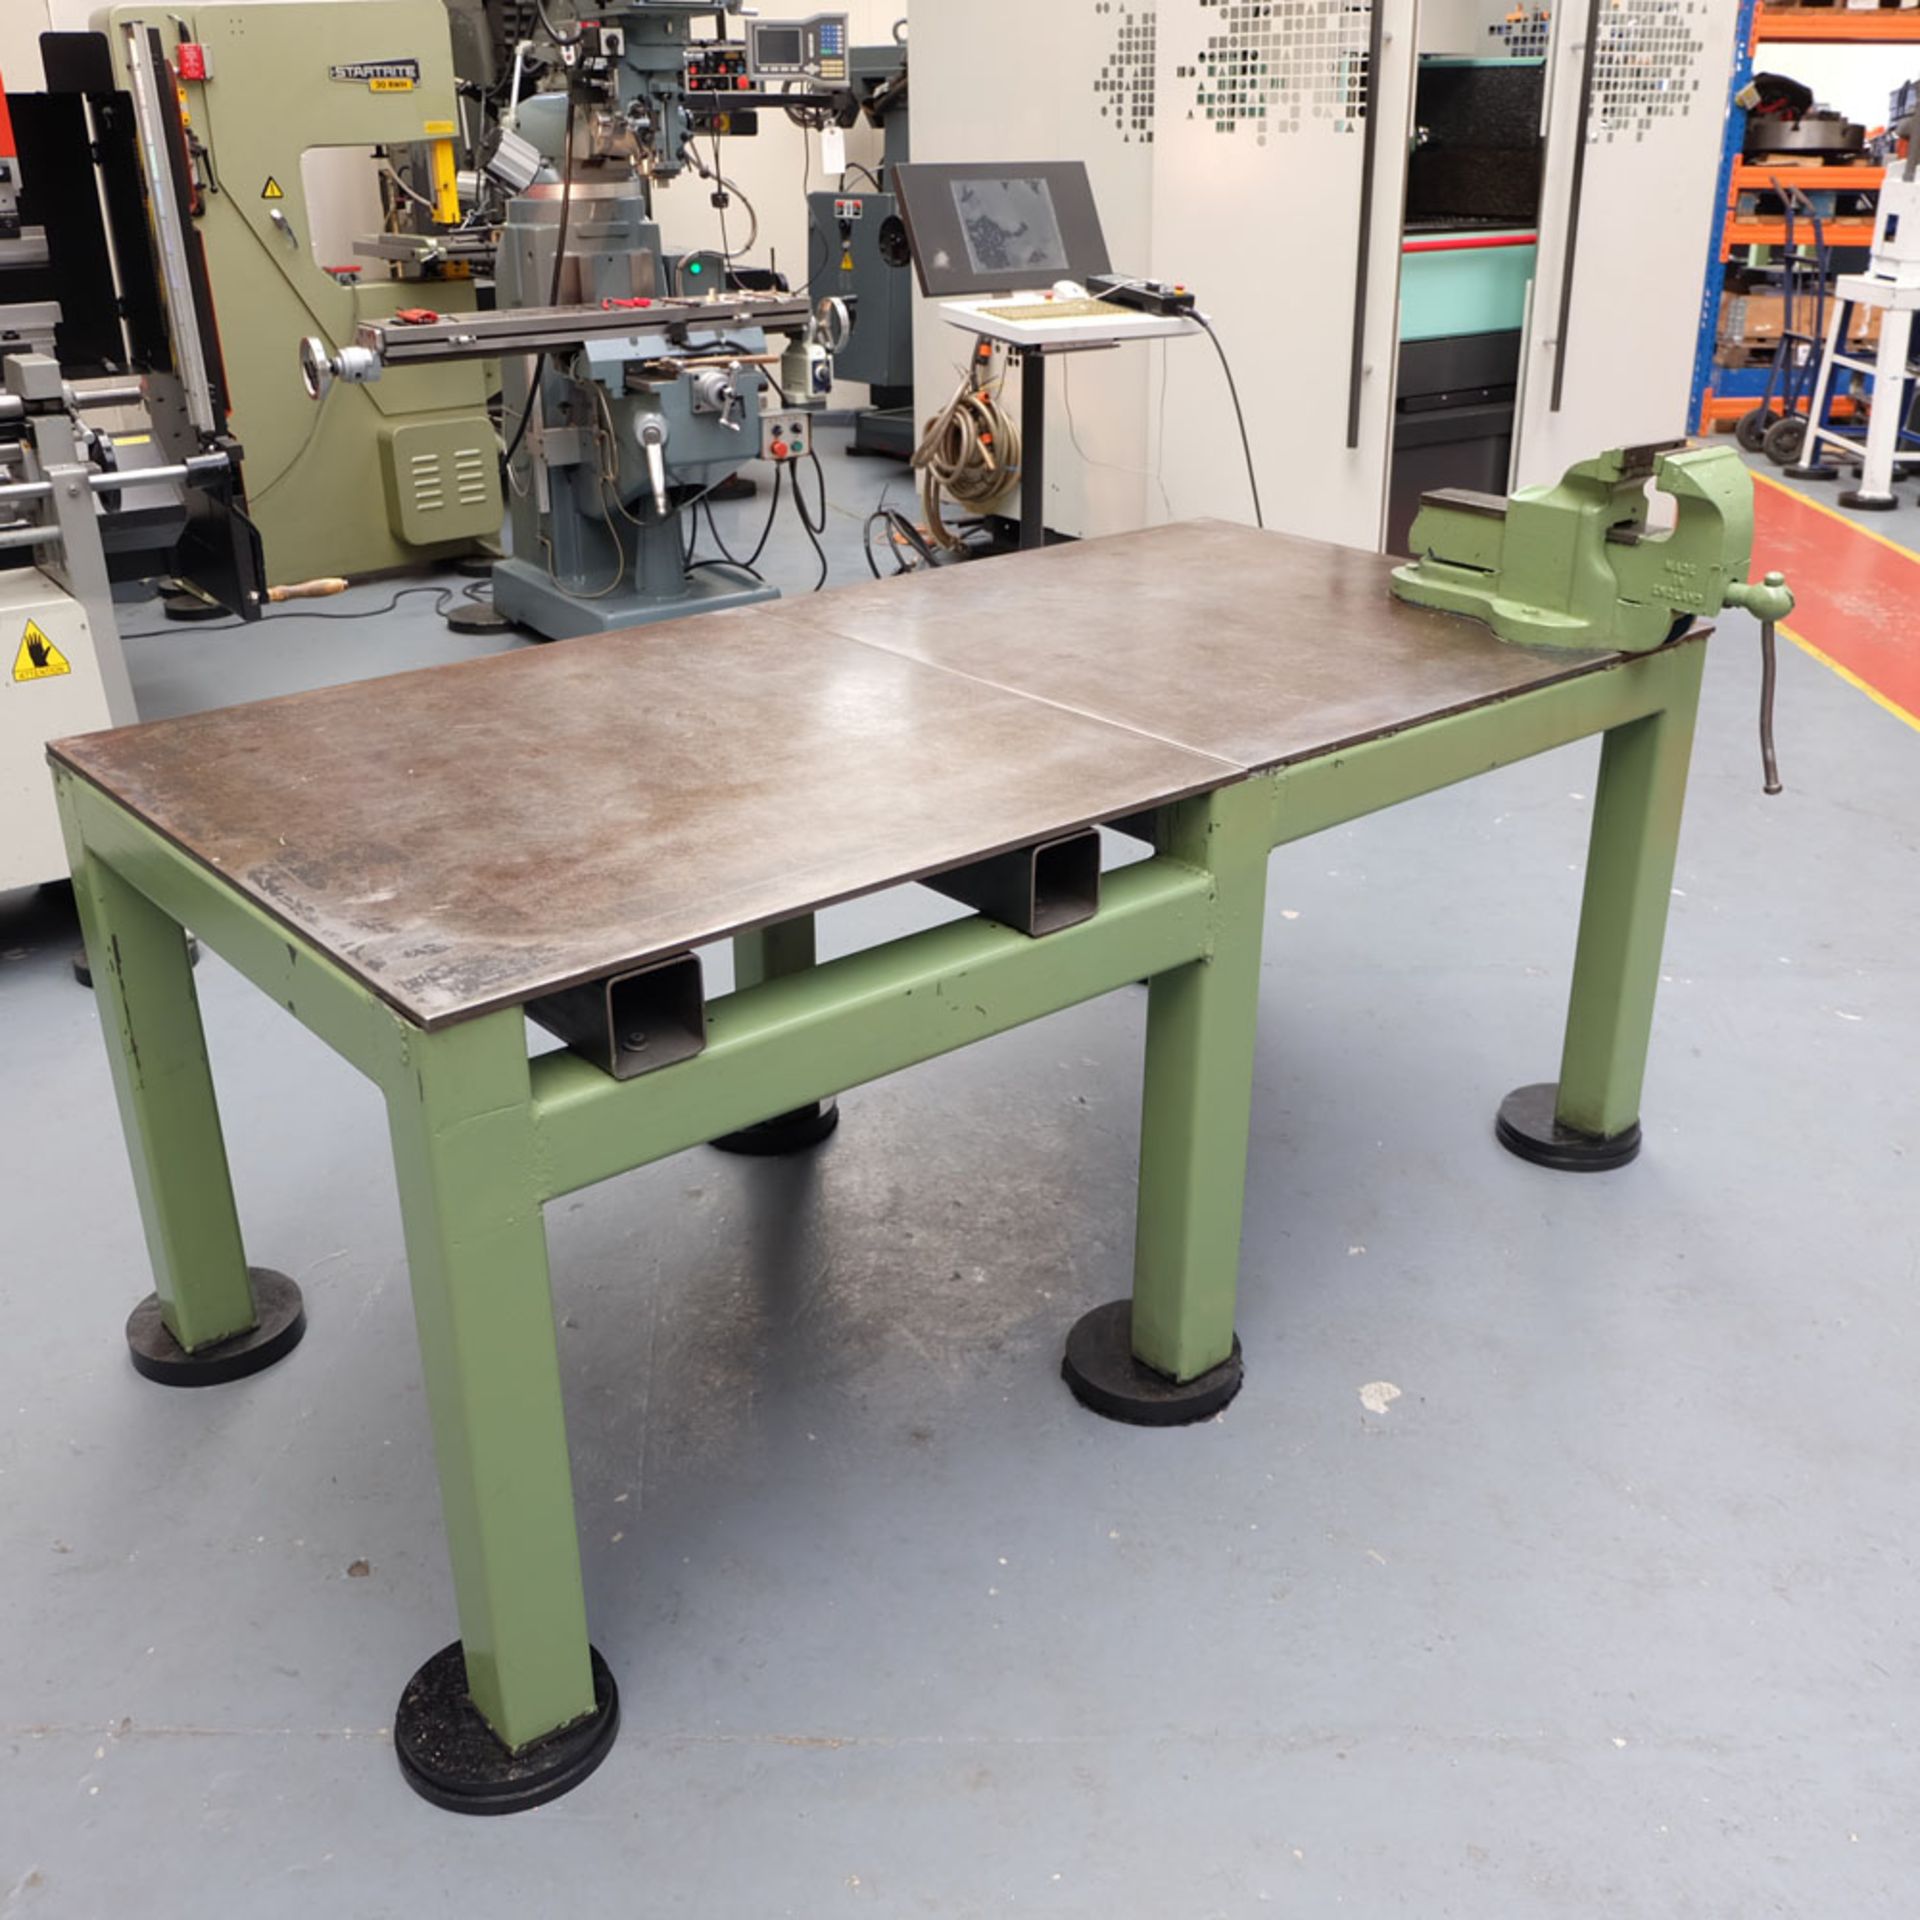 HeavyDuty Steel Work Bench With Record No.25 Bench Vice.Work Bench Size 2000mm x 1000mm x 830mm High - Image 4 of 4